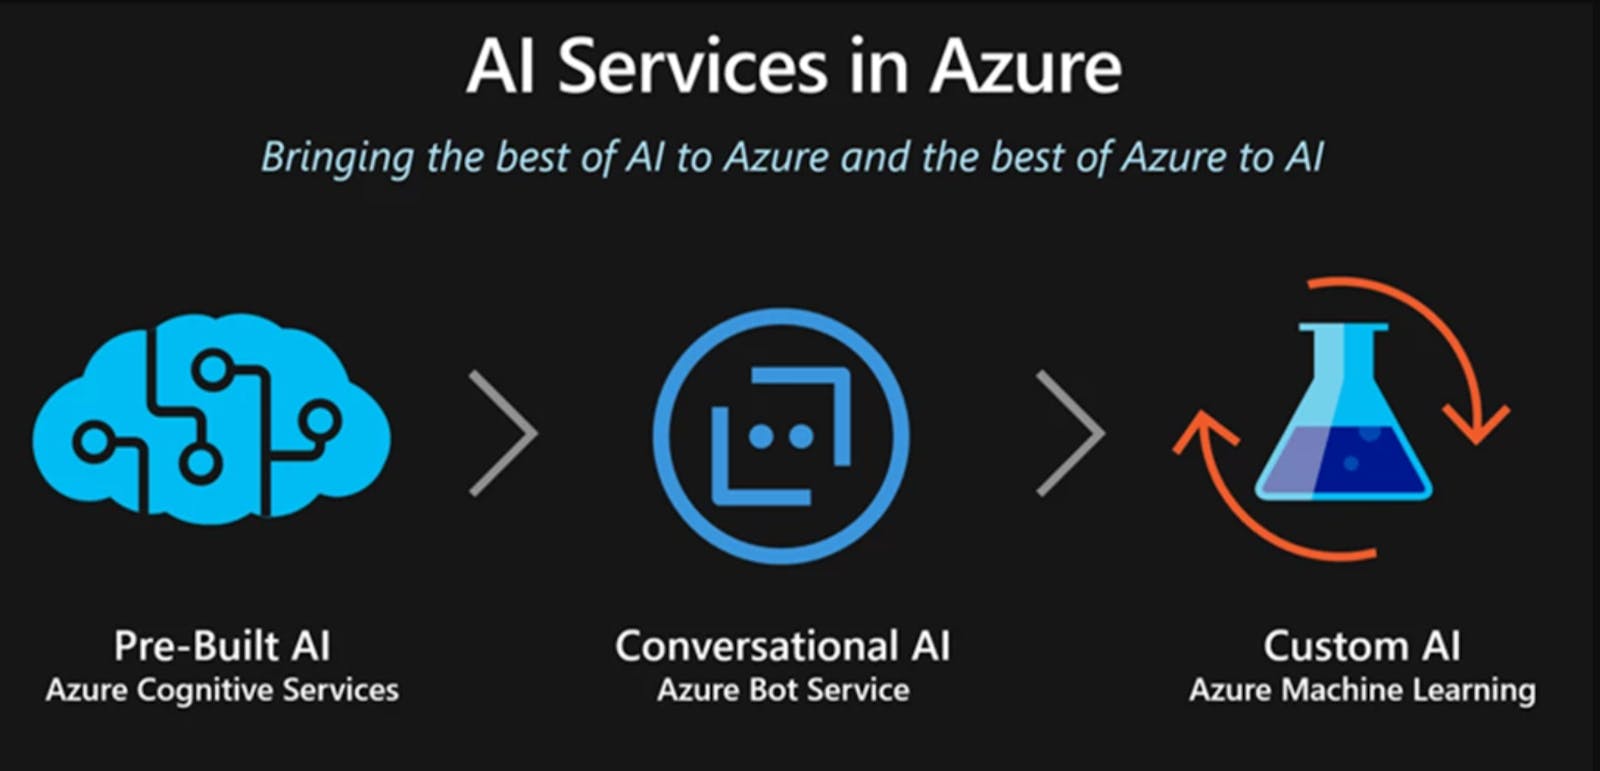 What’s new in Azure Data, AI, & Digital Applications: Modernize your data estate, build intelligent apps, and apply AI solutions